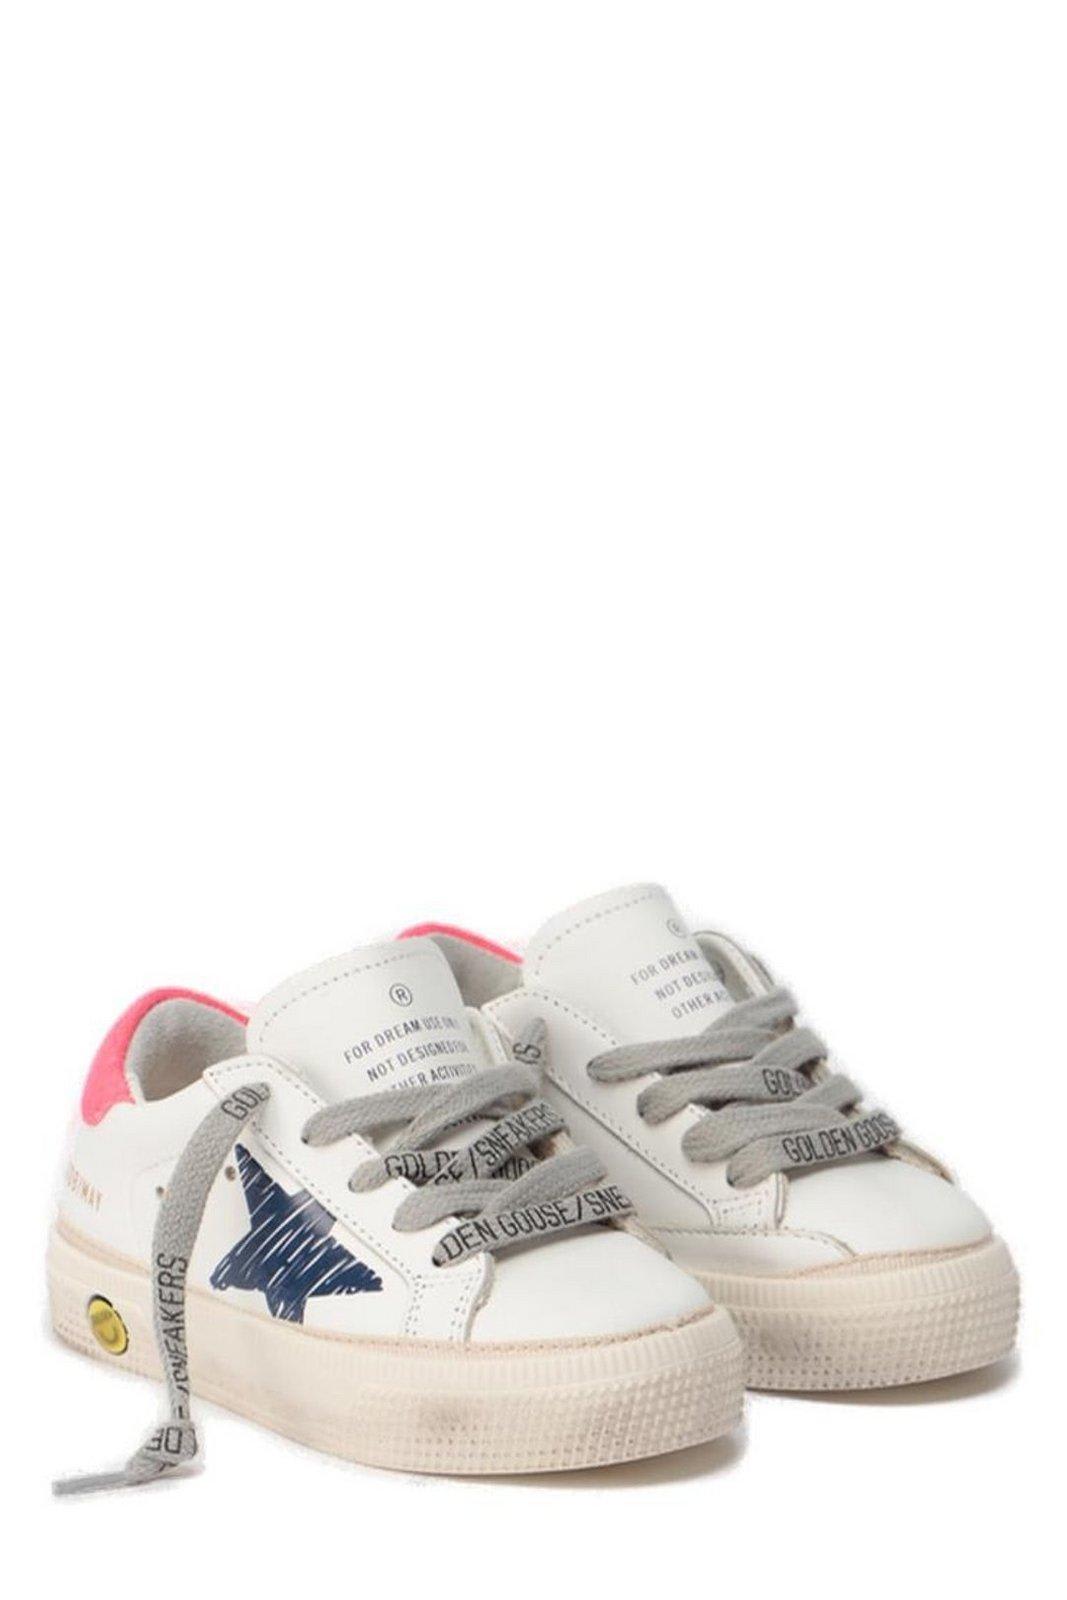 Golden Goose Star Printed Lace-up Sneakers